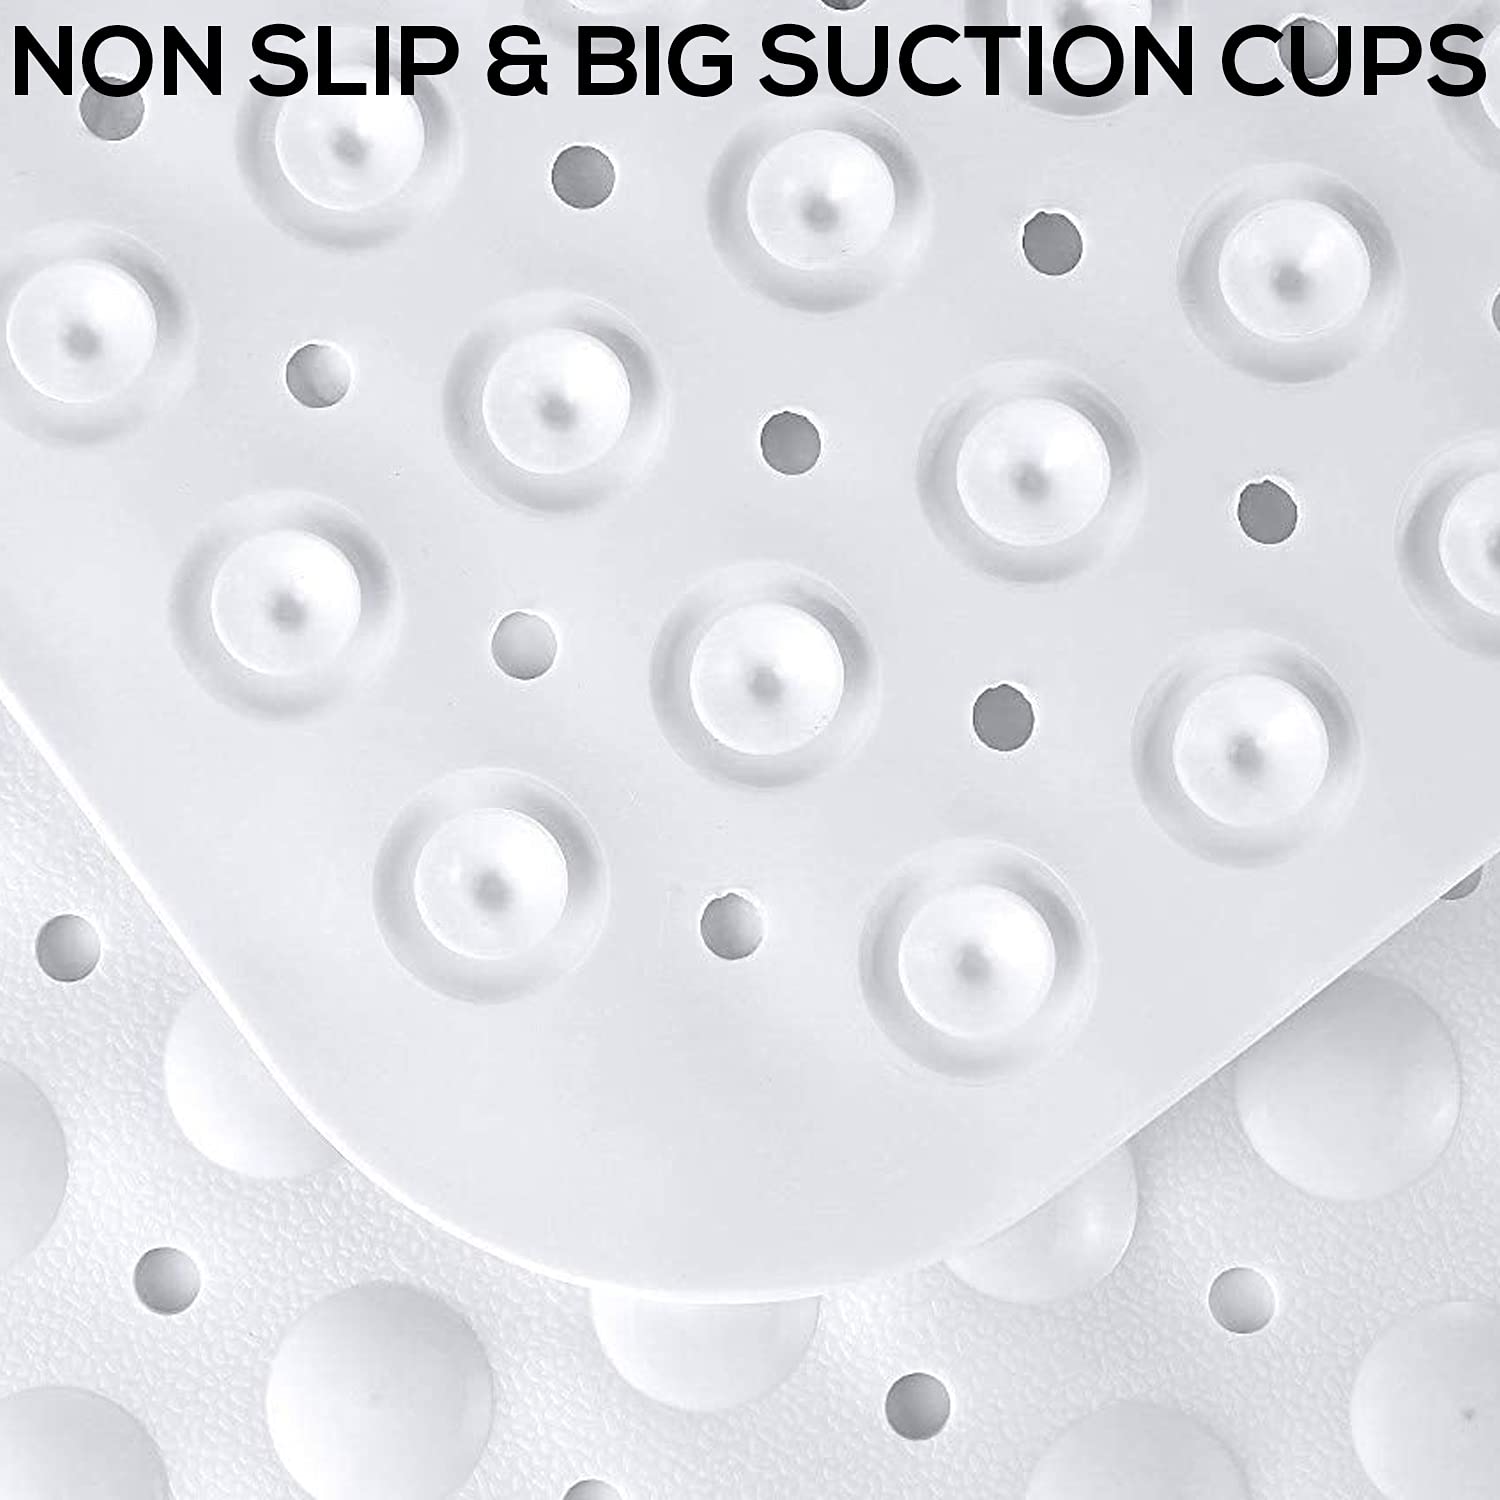 Experia Anti-Slip with Suction Cup Bath Mat with Soft-Pebble (106x60cm, Big Size, White) LifeKrafts